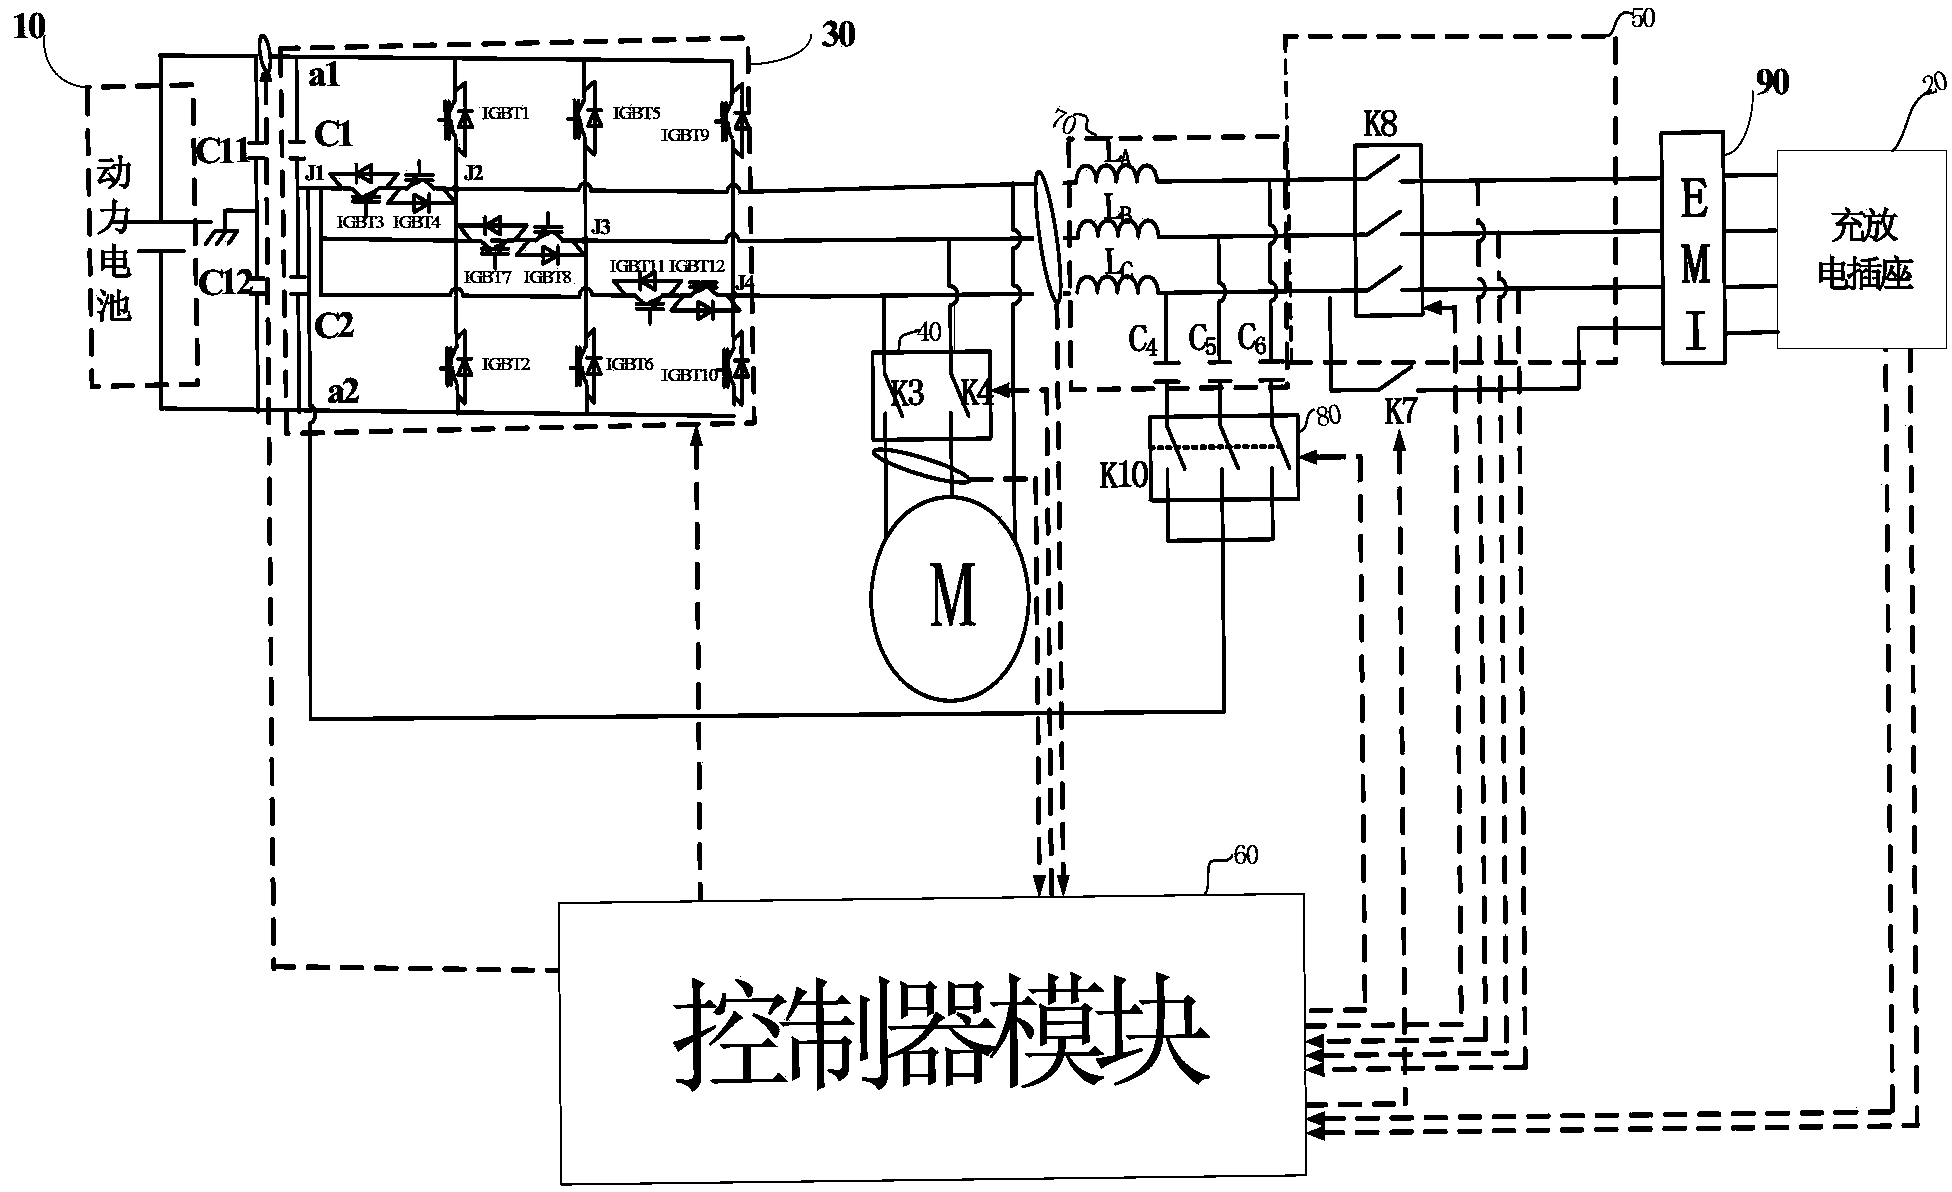 Electric vehicle and power system and motor controller for electric vehicle